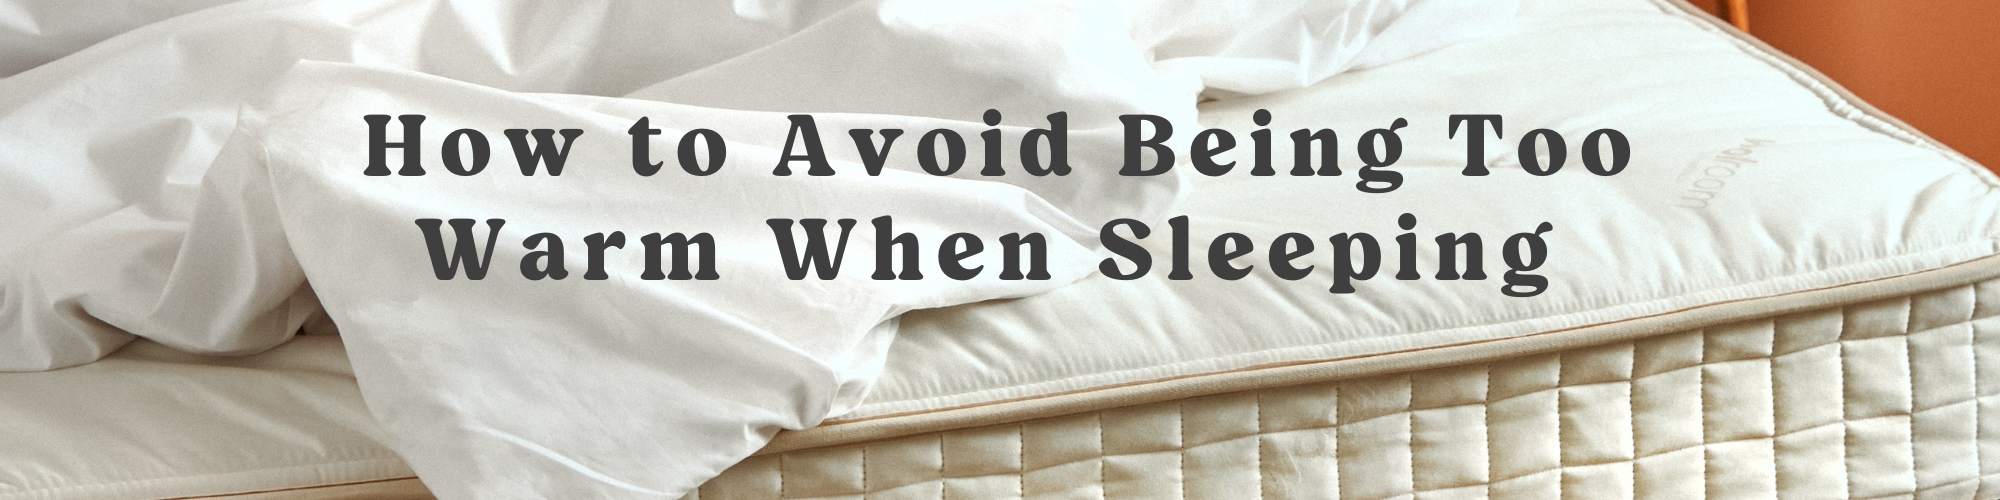 Your Guide: How To Stay Cool While Sleeping - Woolroom